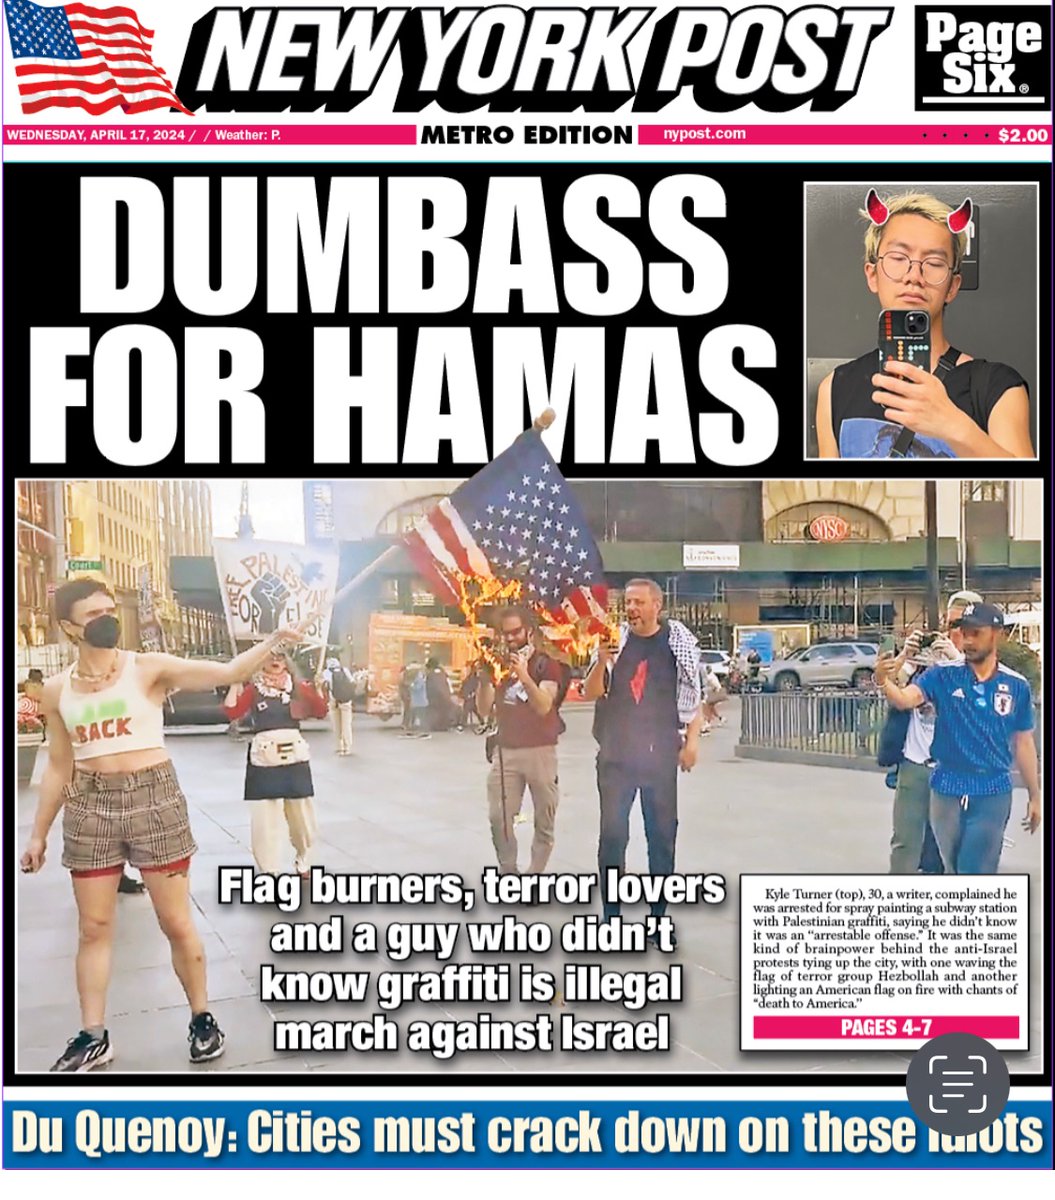 PBFI President Paul du Quenoy on the front page of America’s best newspaper this morning @nypost